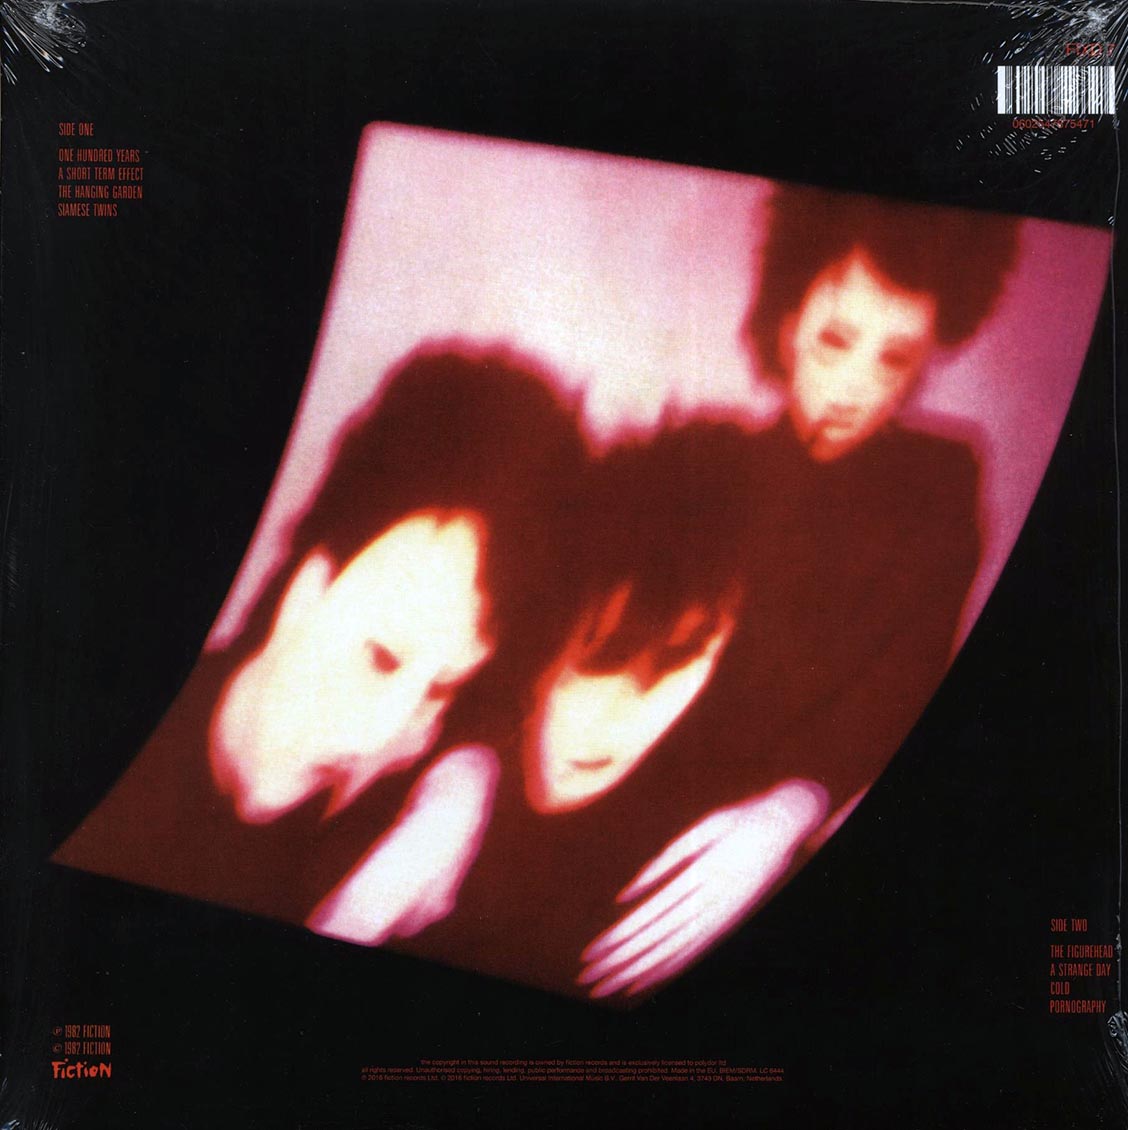 The Cure - Pornography [2016 Remastered180G] [New Vinyl Record LP]